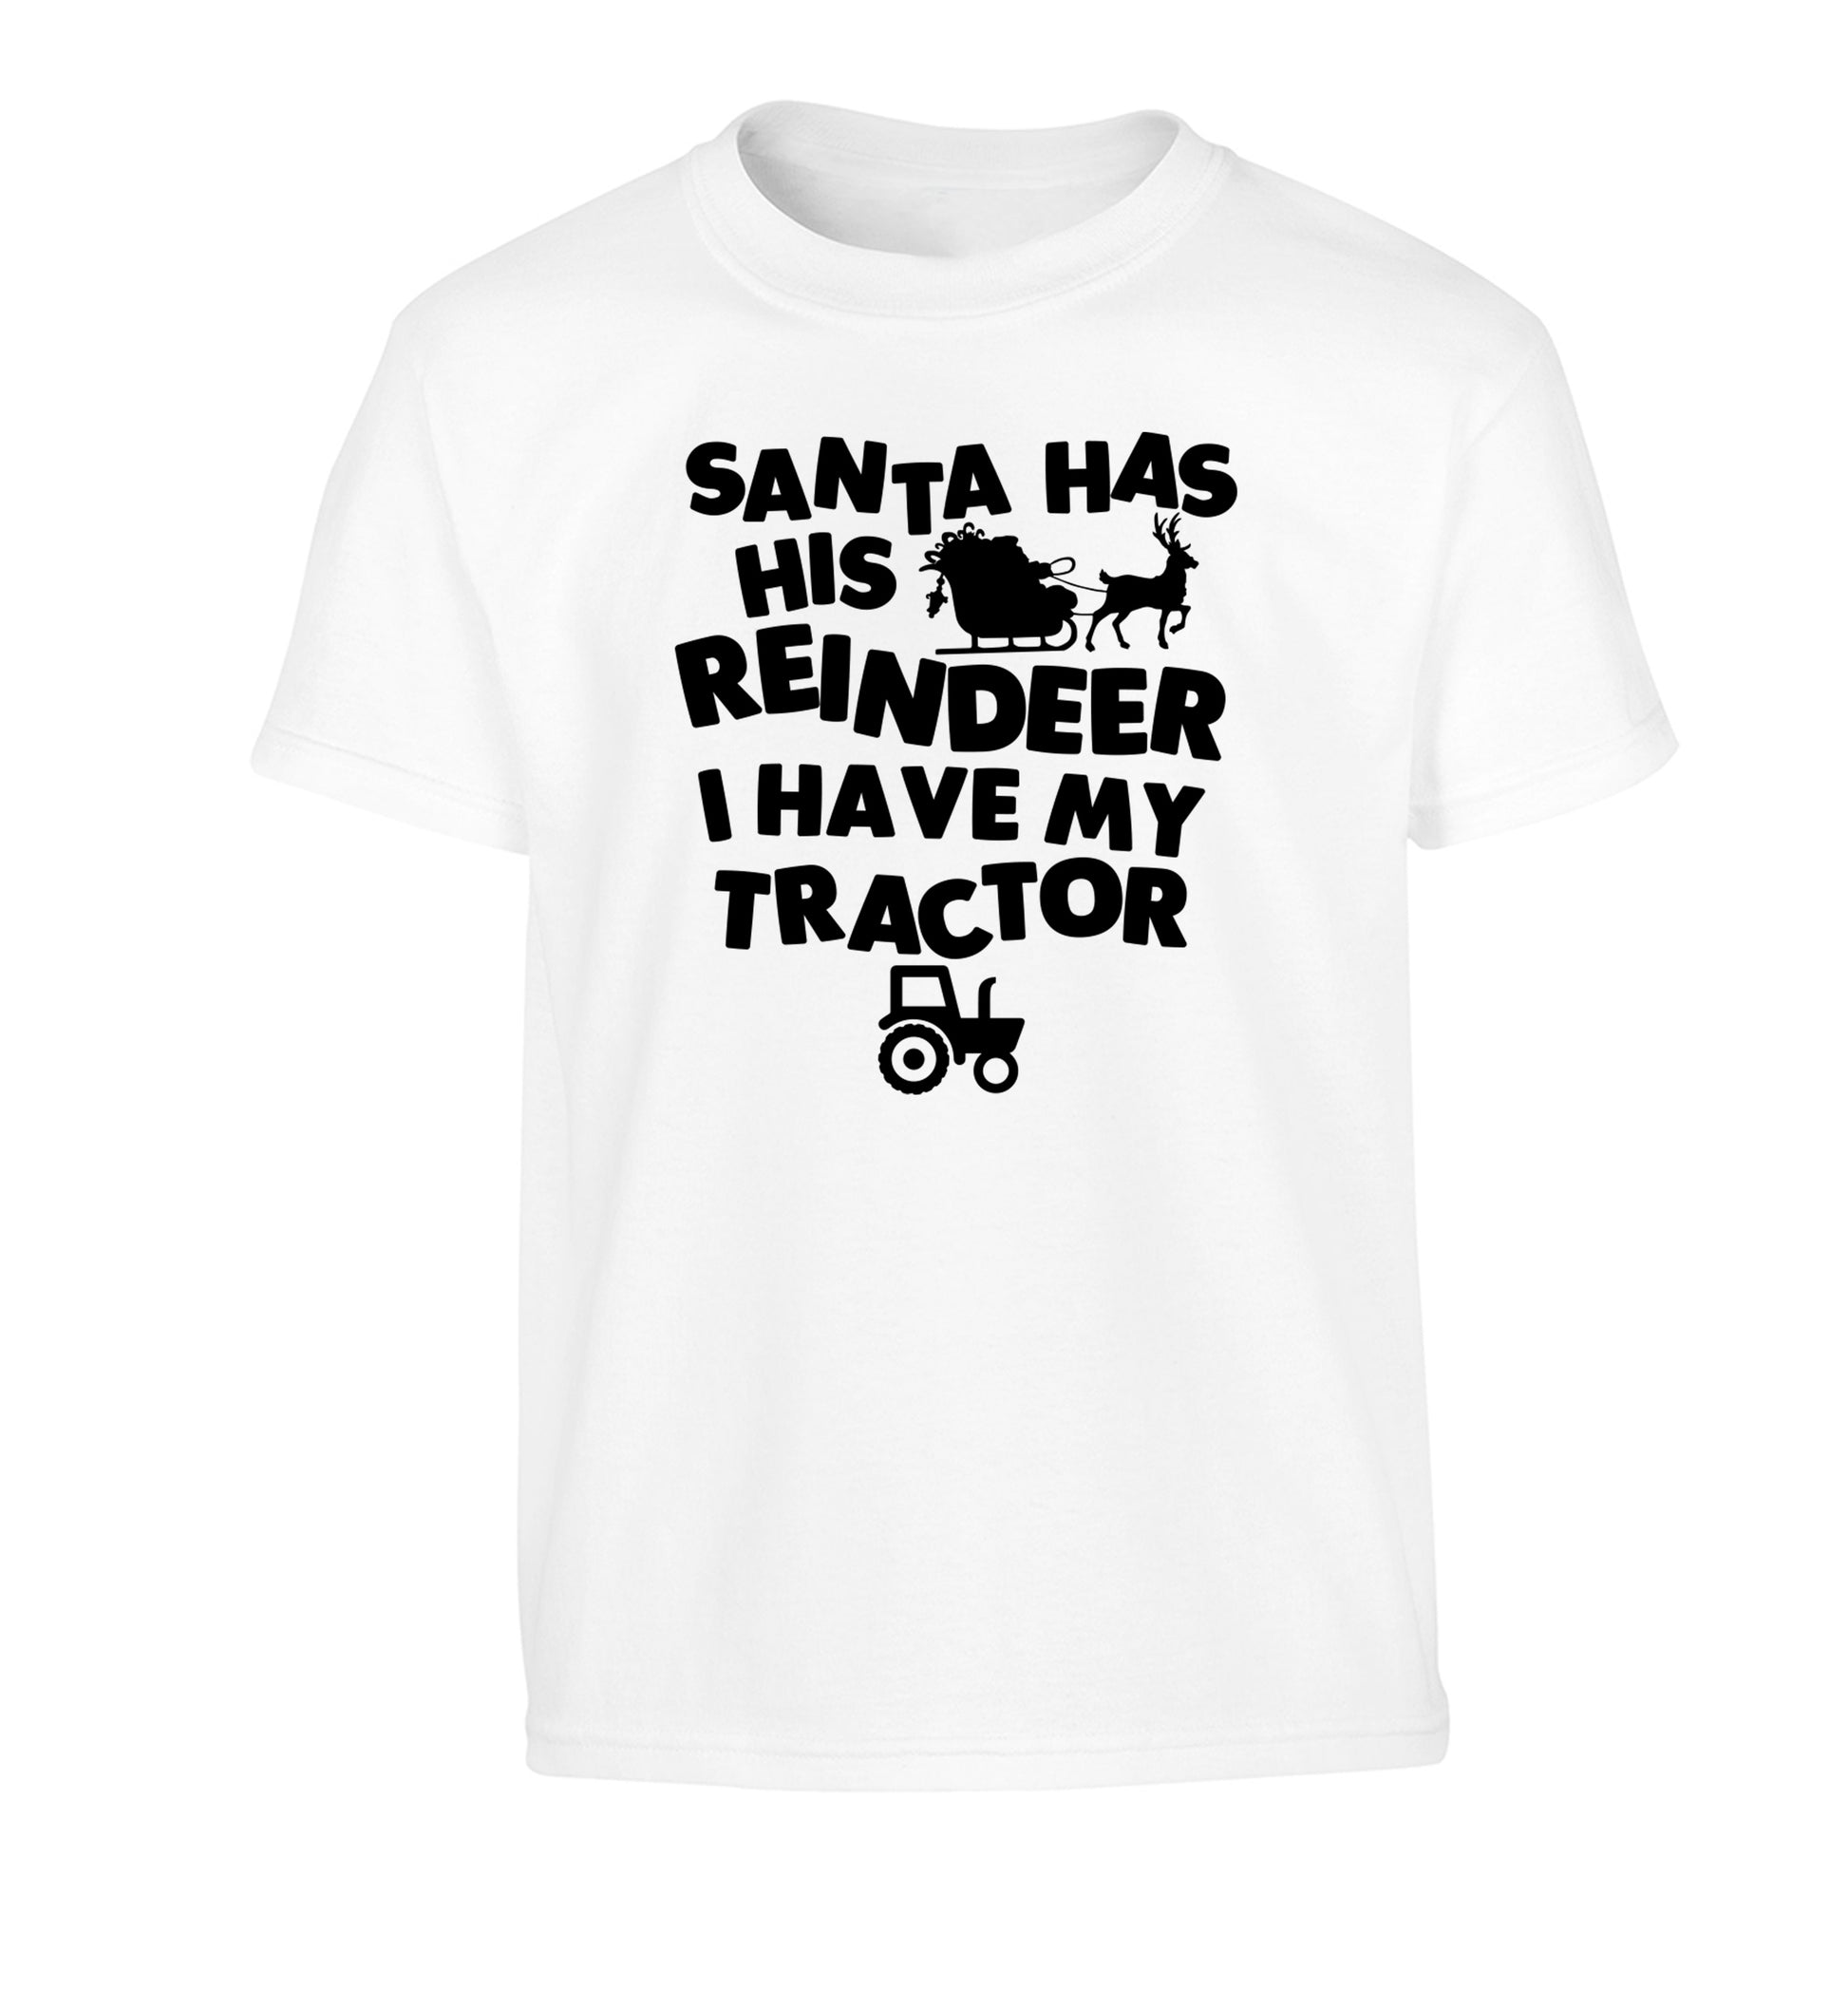 Santa has his reindeer I have my tractor Children's white Tshirt 12-14 Years